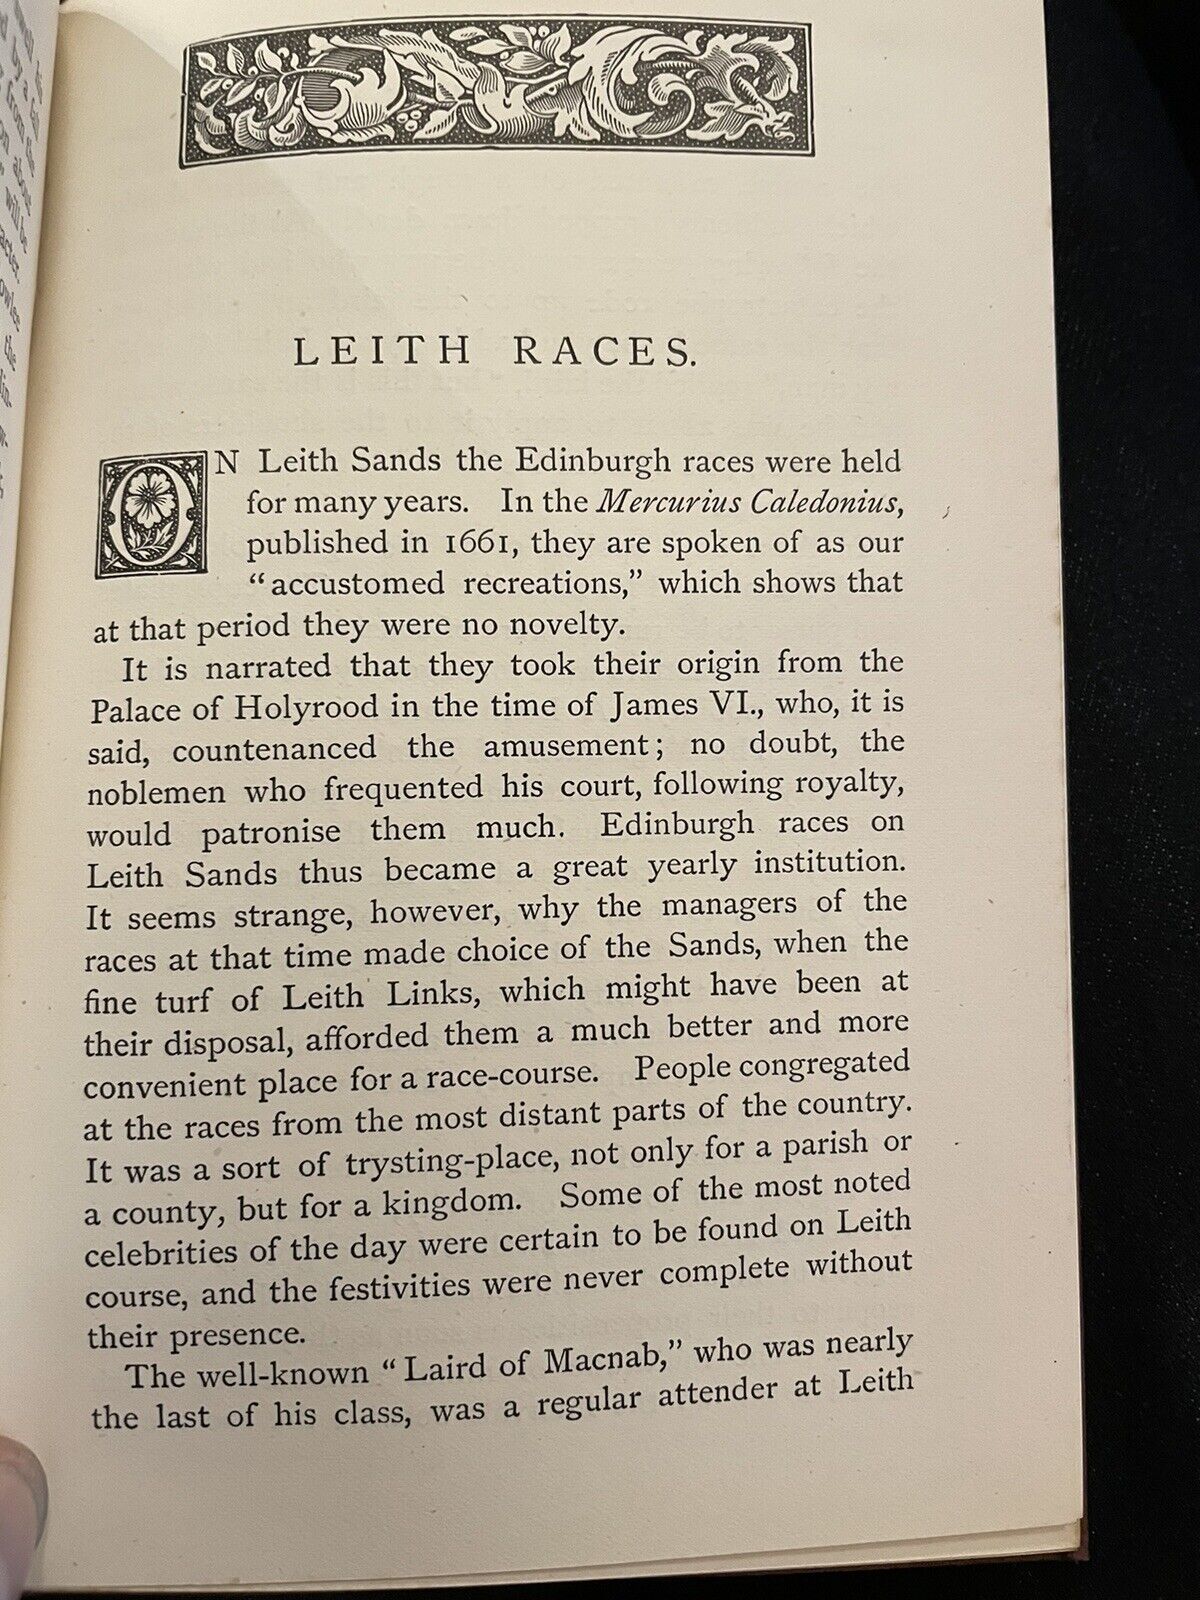 1888 Reminiscences of the Port and Town of Leith, Edinburgh : John Martine